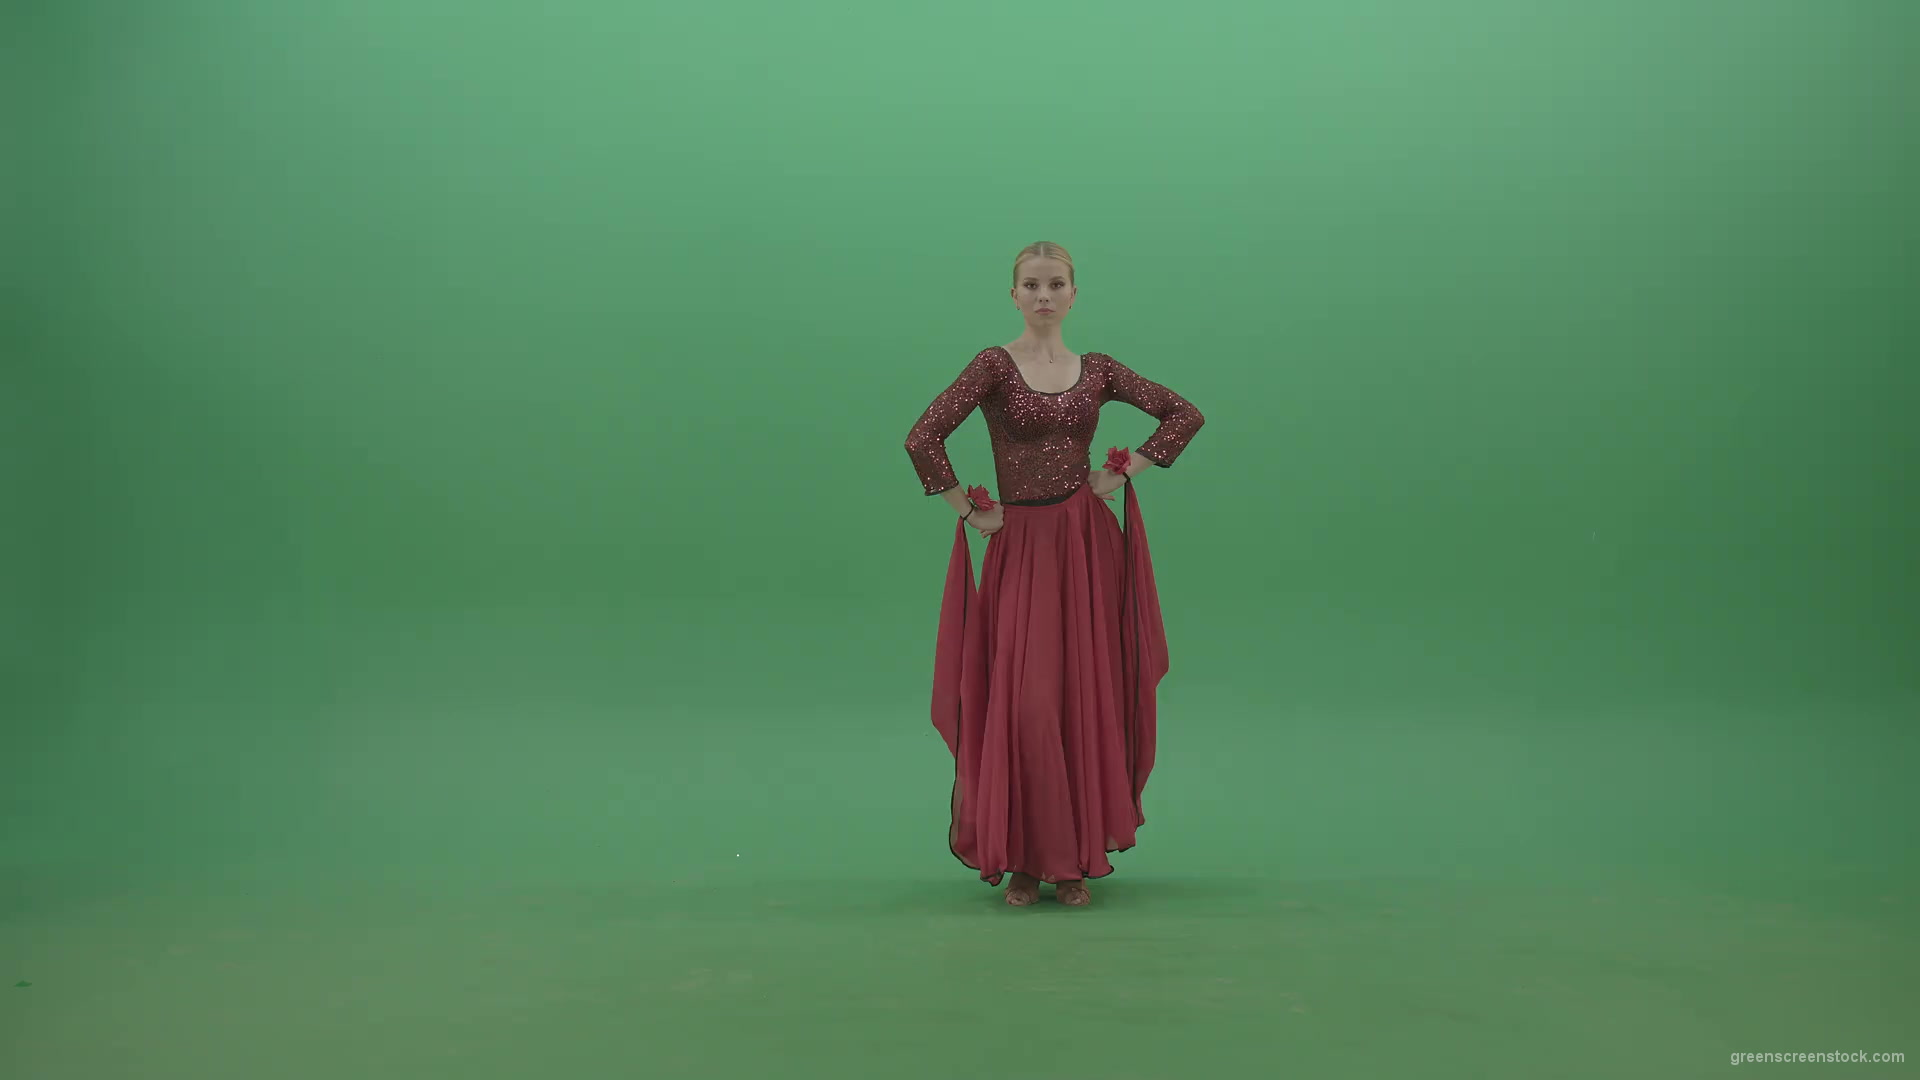 Lovely-rumba-dance-girls-waving-shoulders-in-red-sexy-dress-isolated-on-green-background-4K-Video-Footage-1920_001 Green Screen Stock